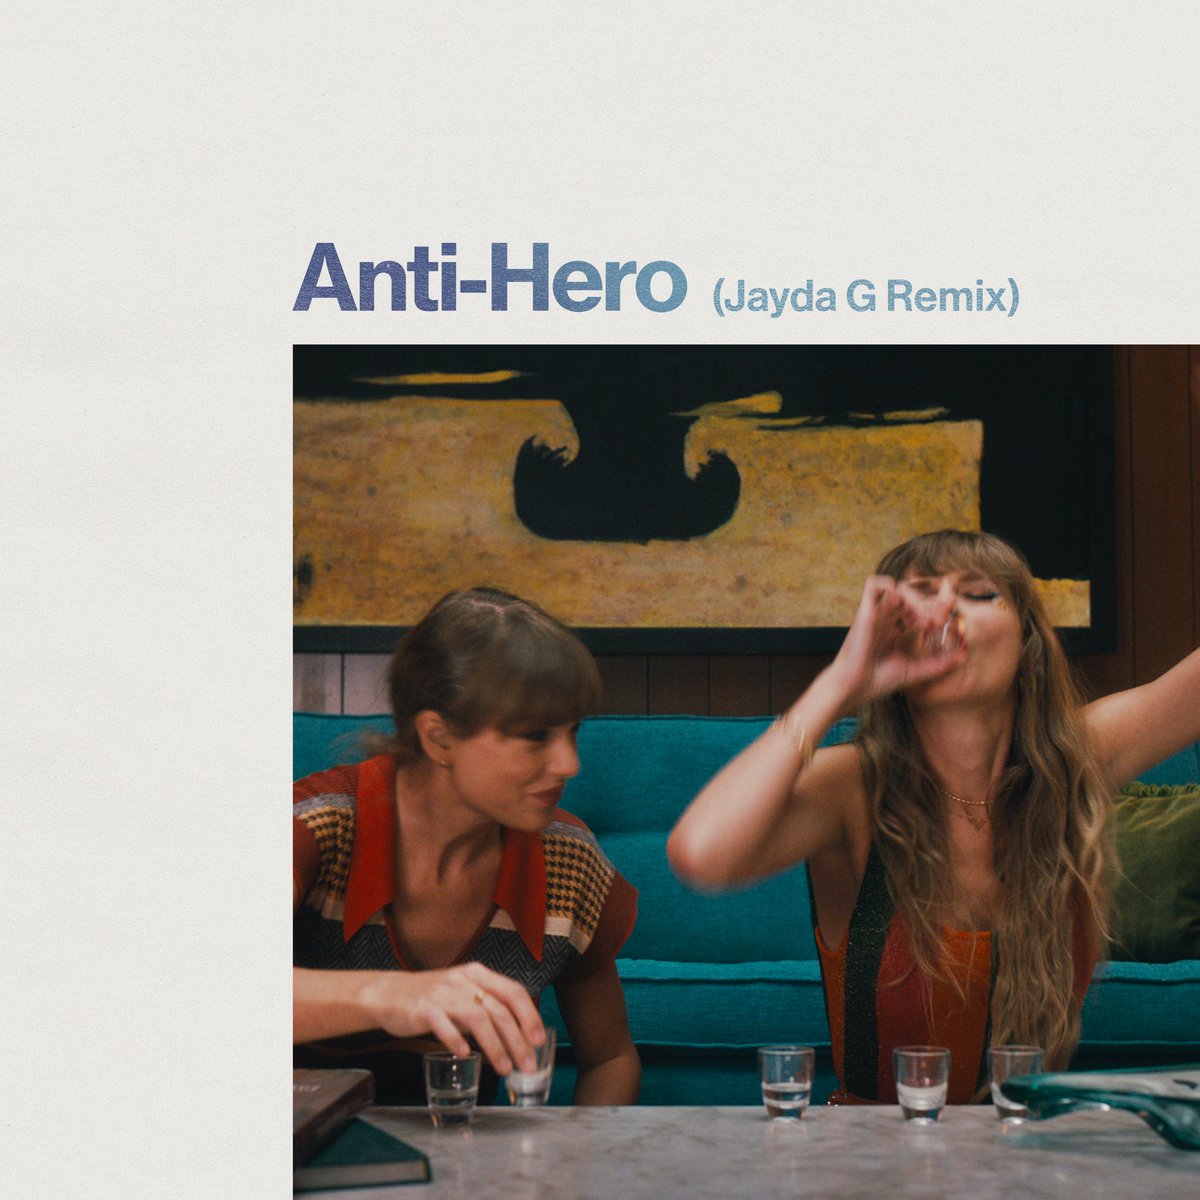 Take your self loathing to the dancefloor! 2 more Anti Hero remixes available on my site until 10pm ET tonight 🙃 store.taylorswift.com